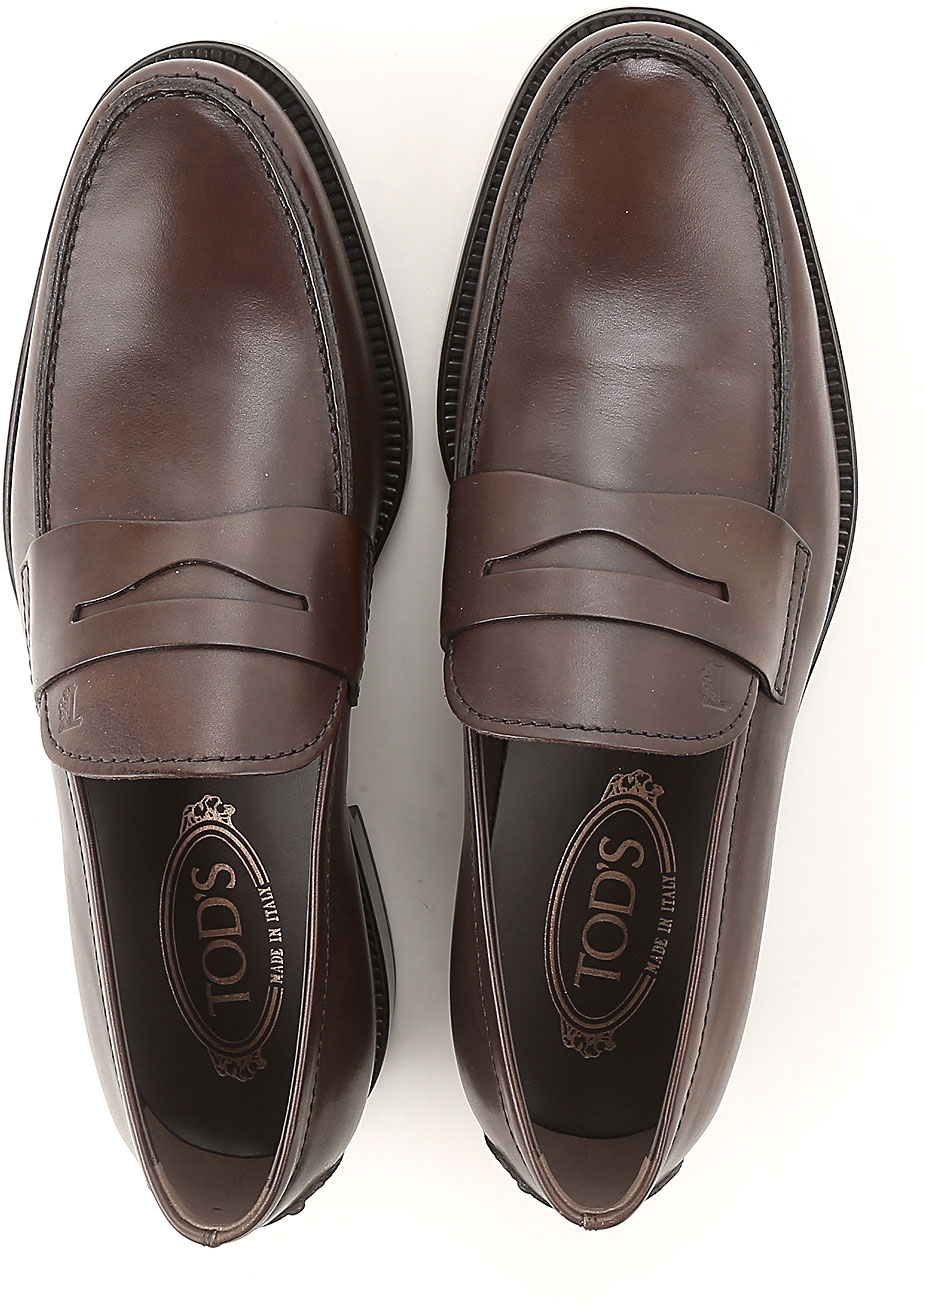 Mens Shoes Tods, Style code: xxm0ge00640d90s800--